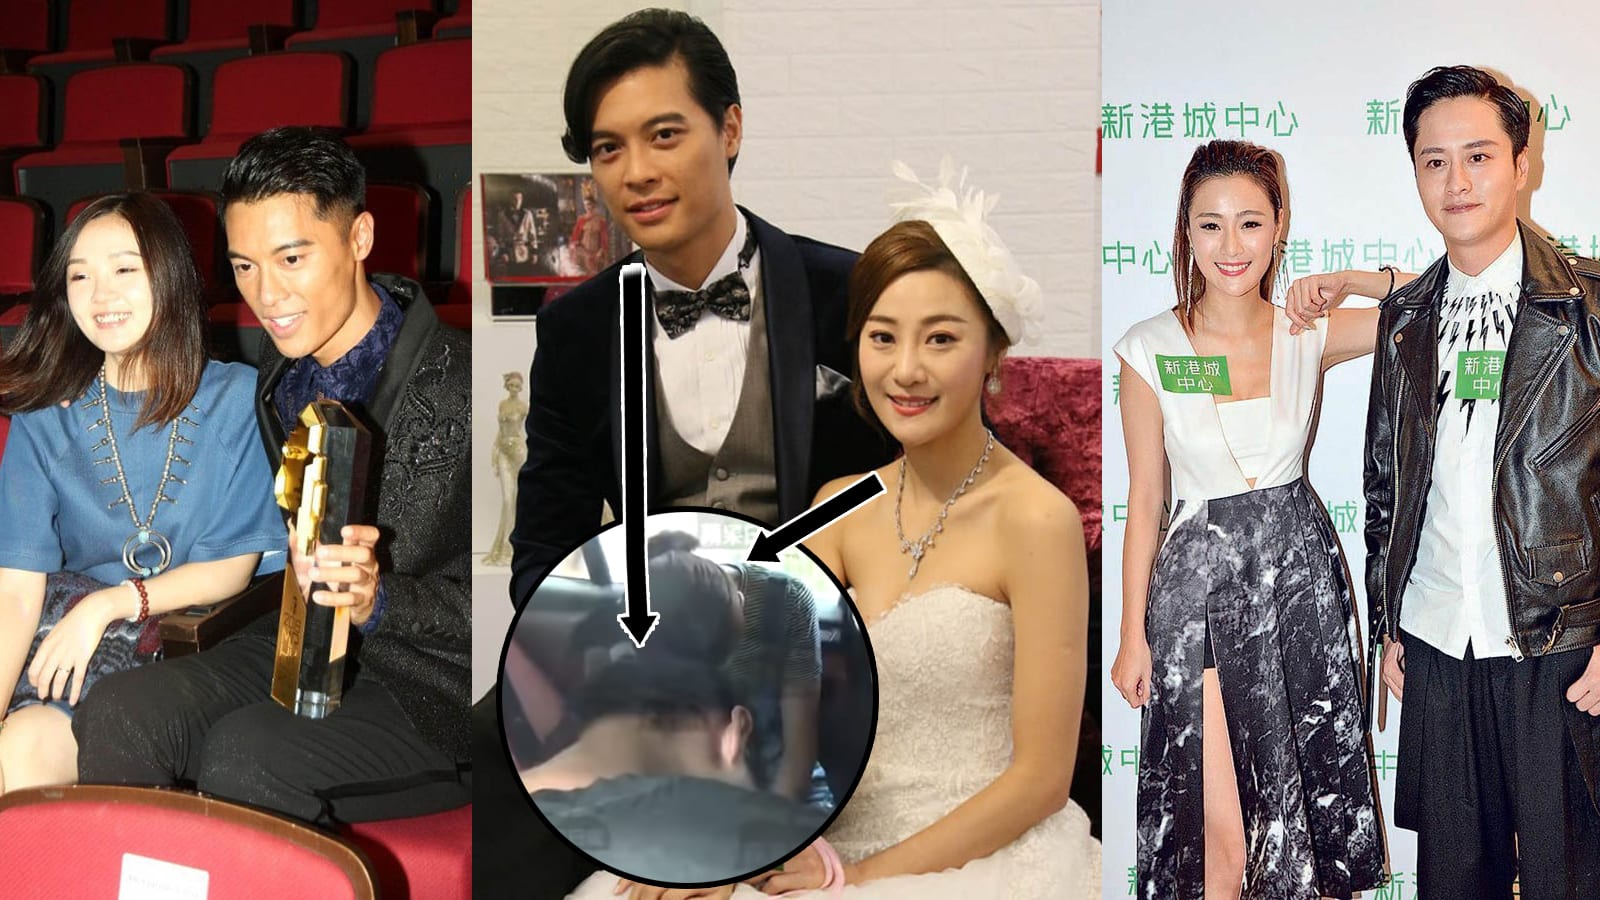 HK TV Stars Ashley Chu & Jackson Lai Were Caught On A Secluded Mountain But Deny They’re Cheating On Their Partners